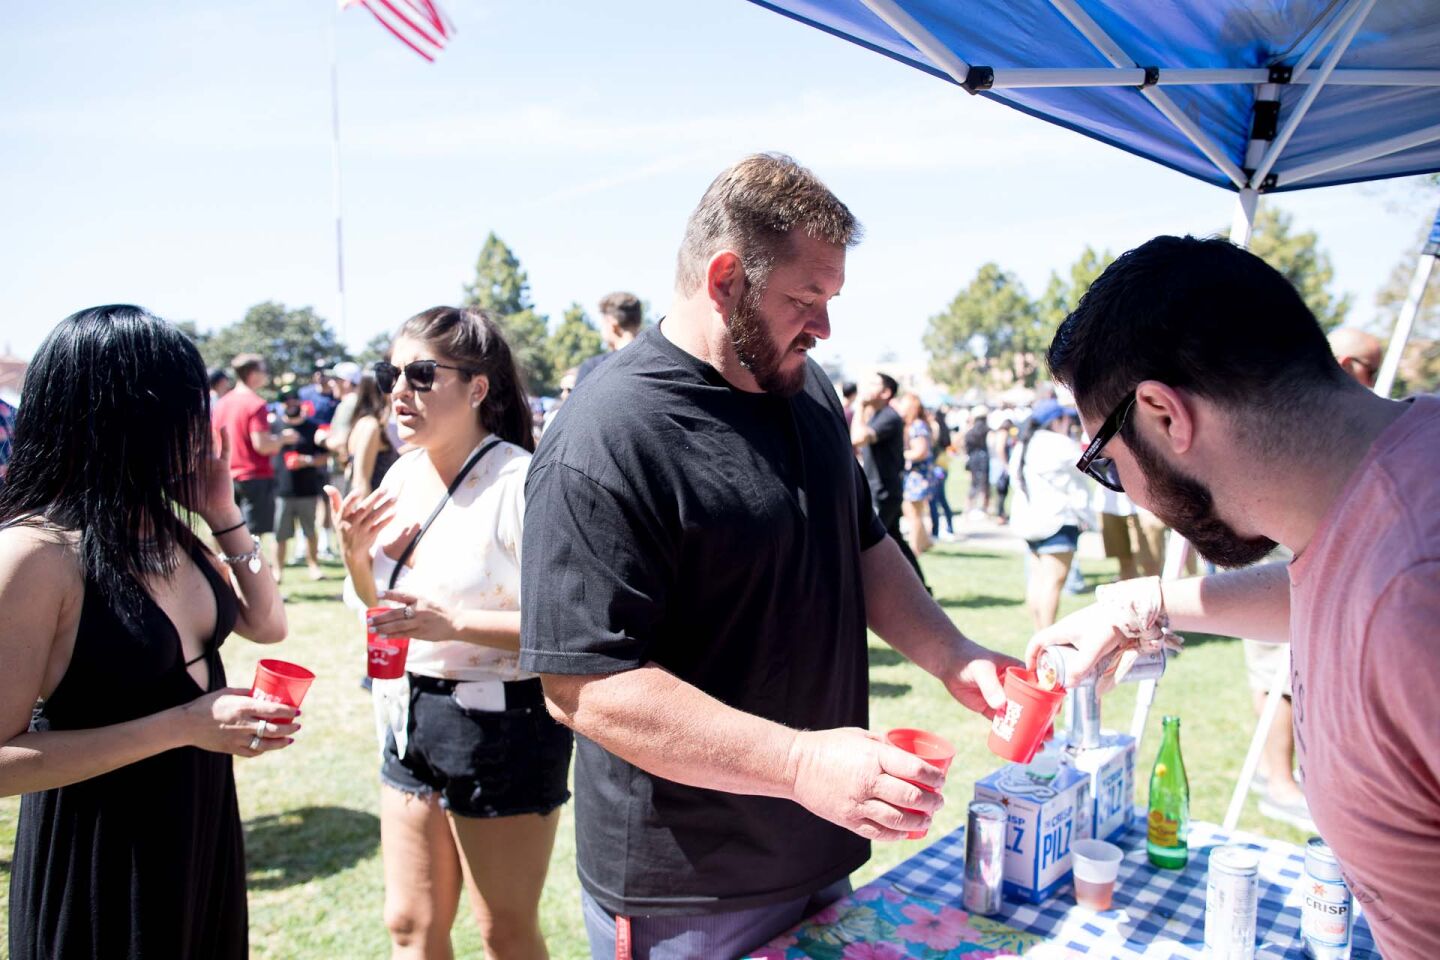 San Diegans showed love for Mexico at the Tacos & Tequila Festival San Diego 2019 at Liberty Station on Saturday, May 4, 2019.